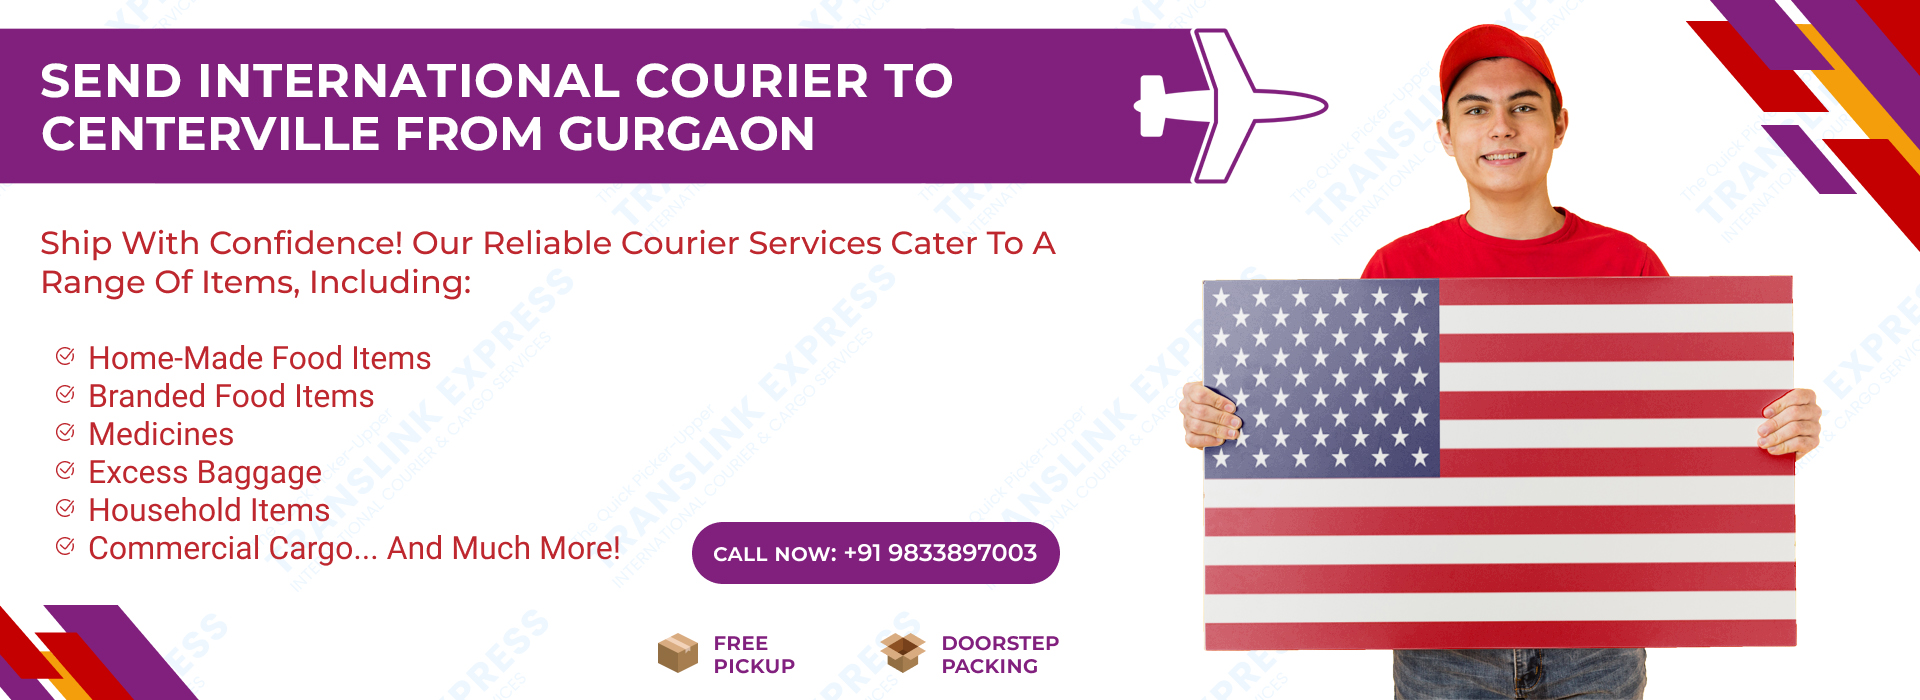 Courier to Centerville From Gurgaon